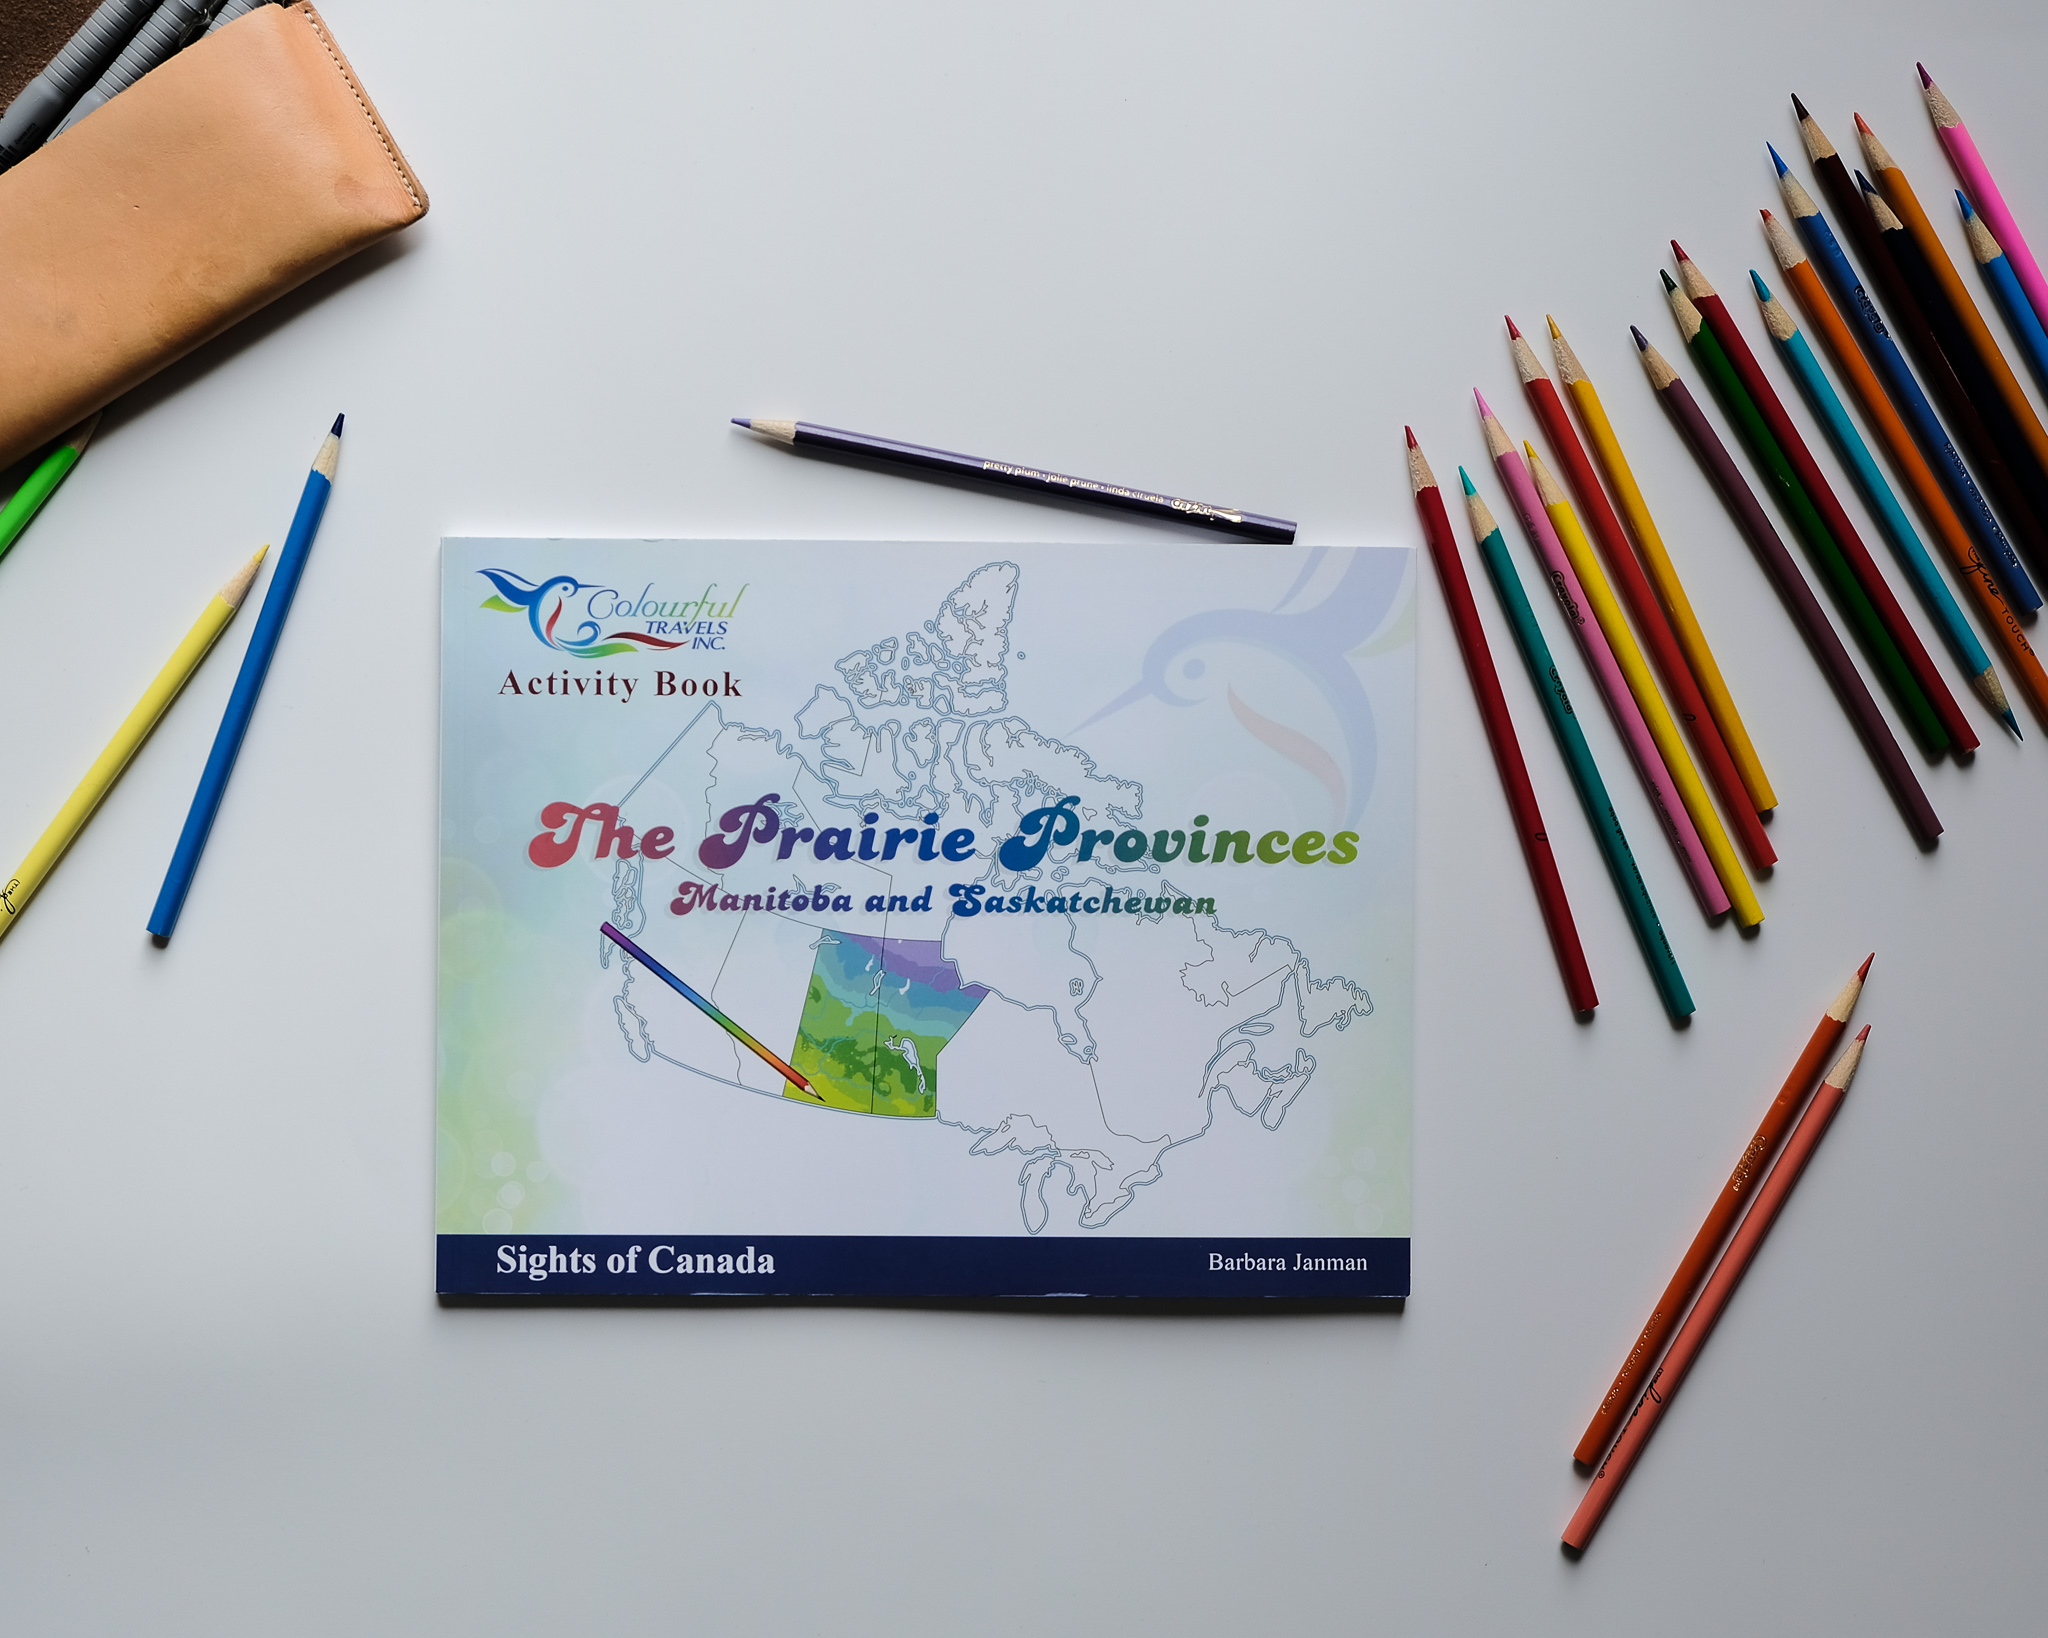 The Prairie Provinces - Sights of Canada